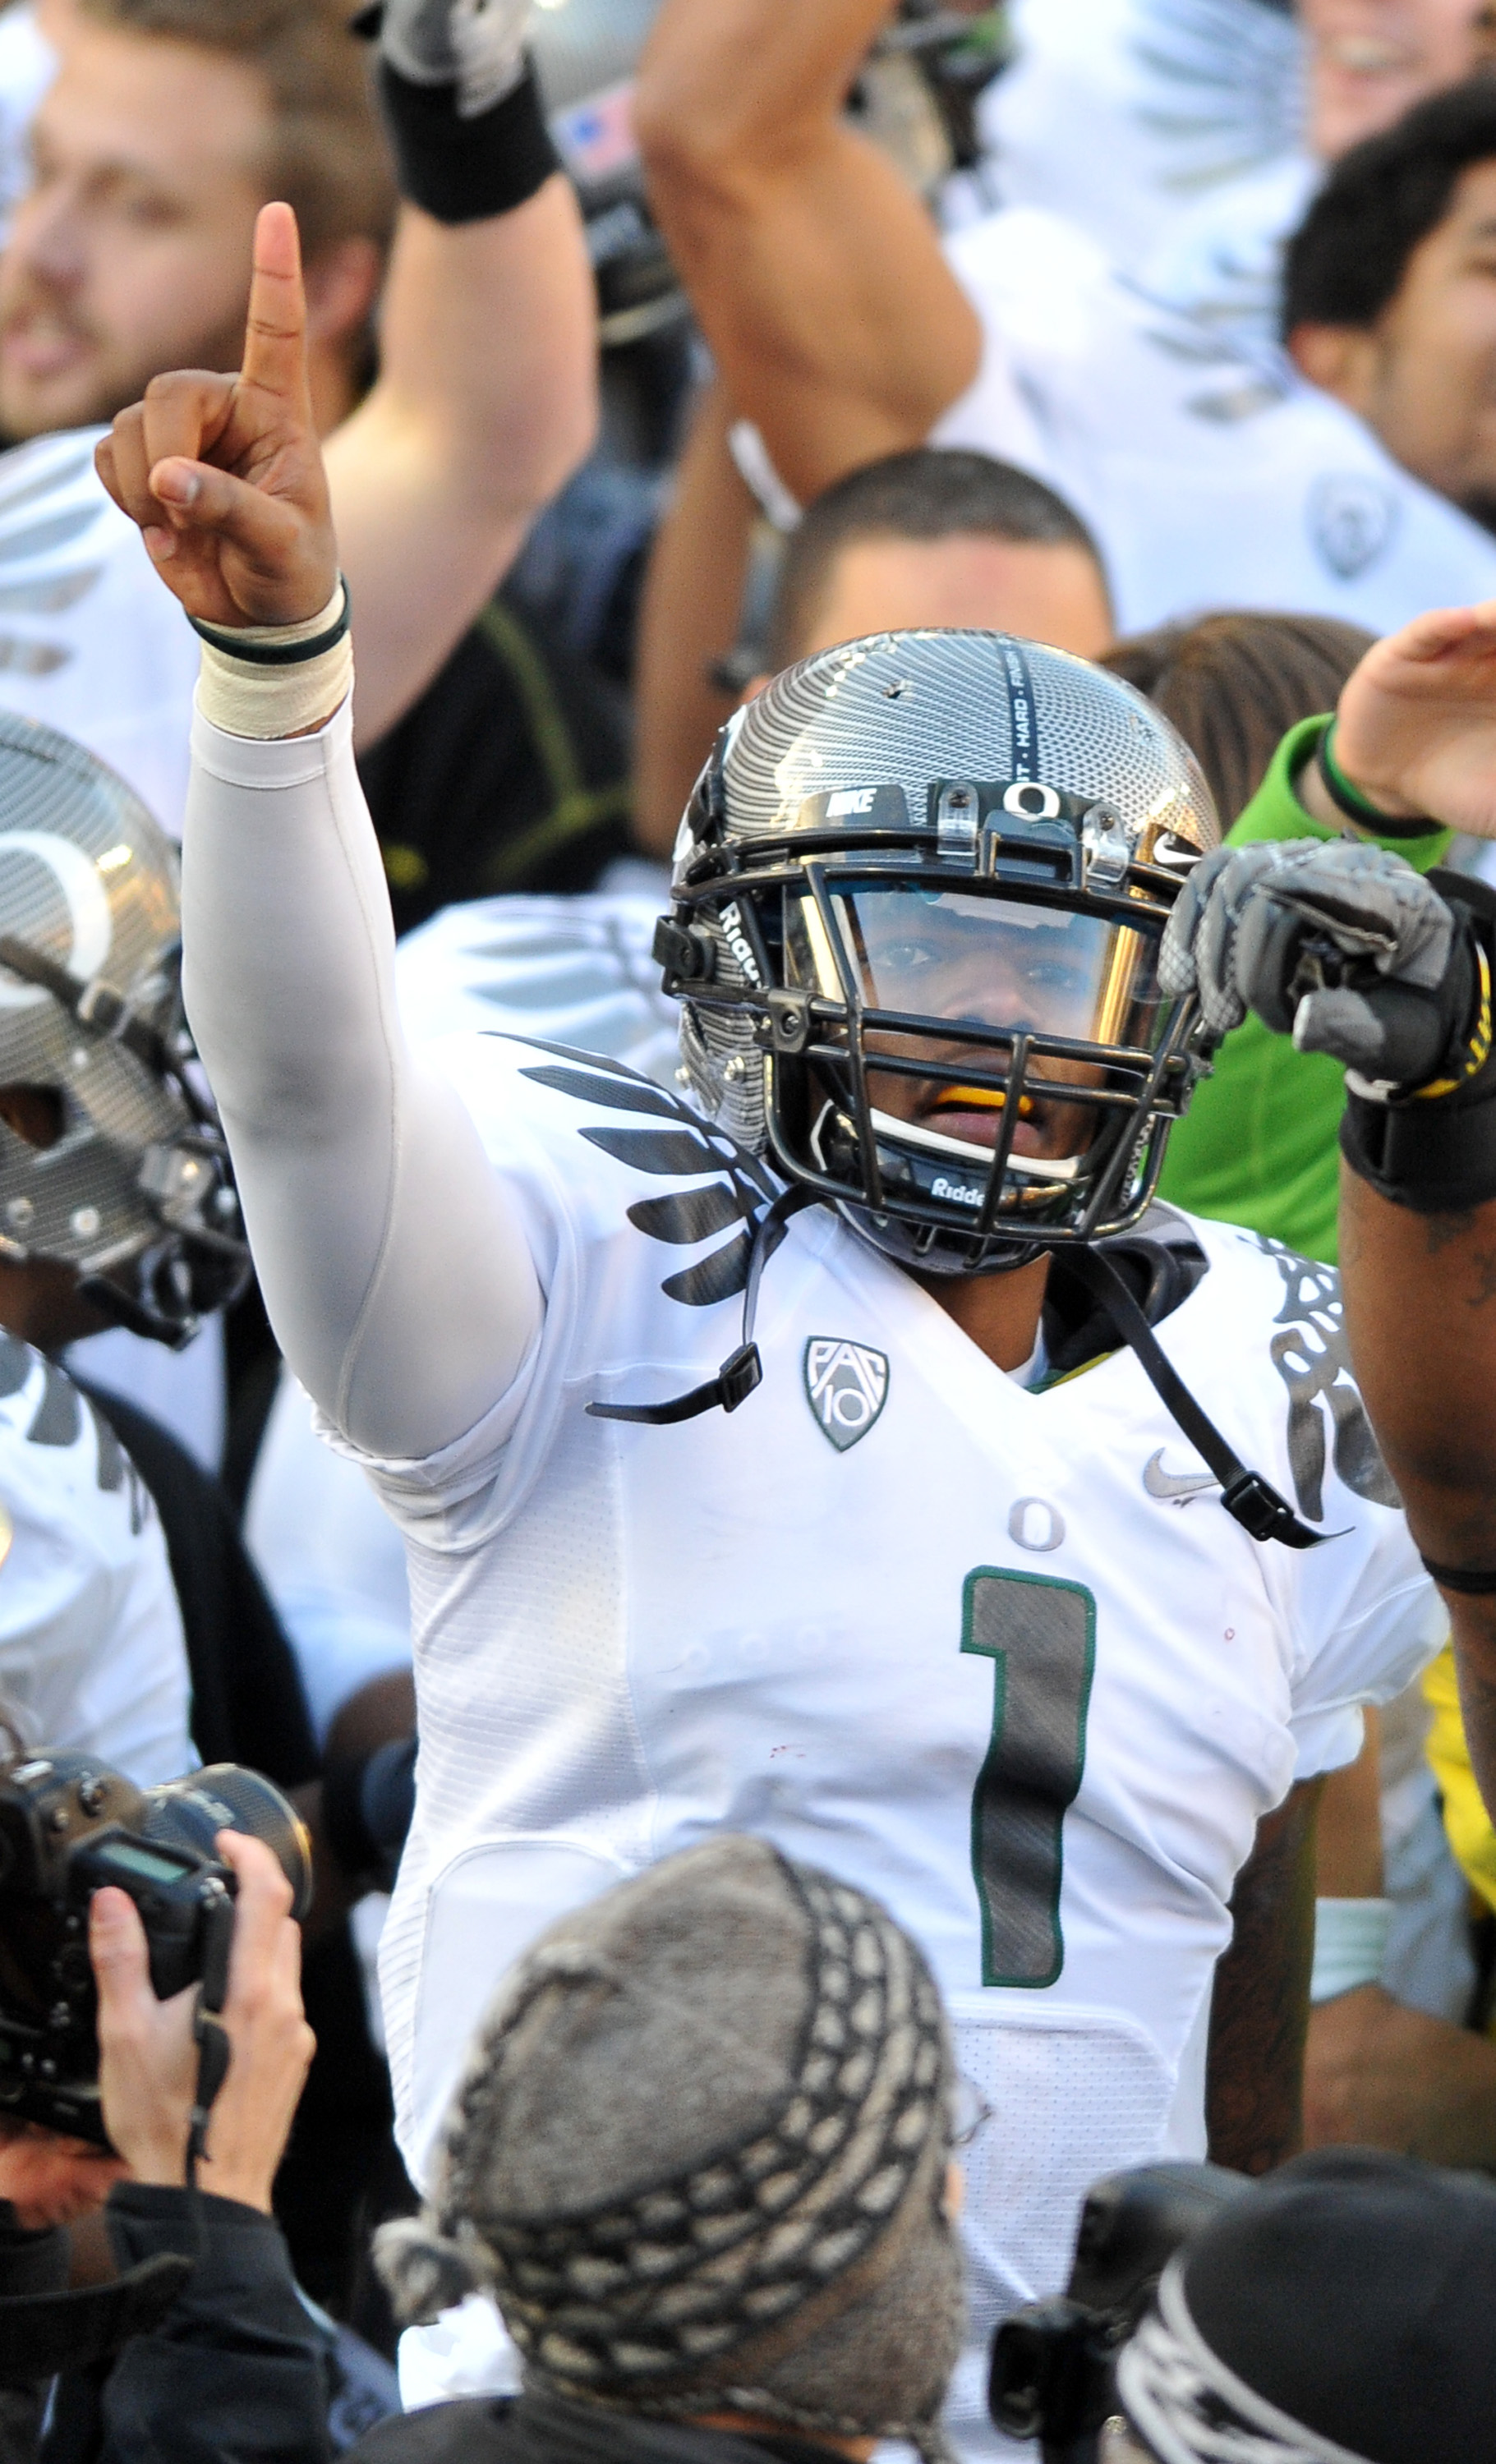 CORVALLIS, OR - DECEMBER 4: Quarterback Darron Thomas #1 of the Oregon Ducks signals to the fans in the stands after the game at Reser Stadium on December 4, 2010 in Corvallis, Oregon. he Ducks beat the Beavers 37-20 to likely go on the BCS Championship g